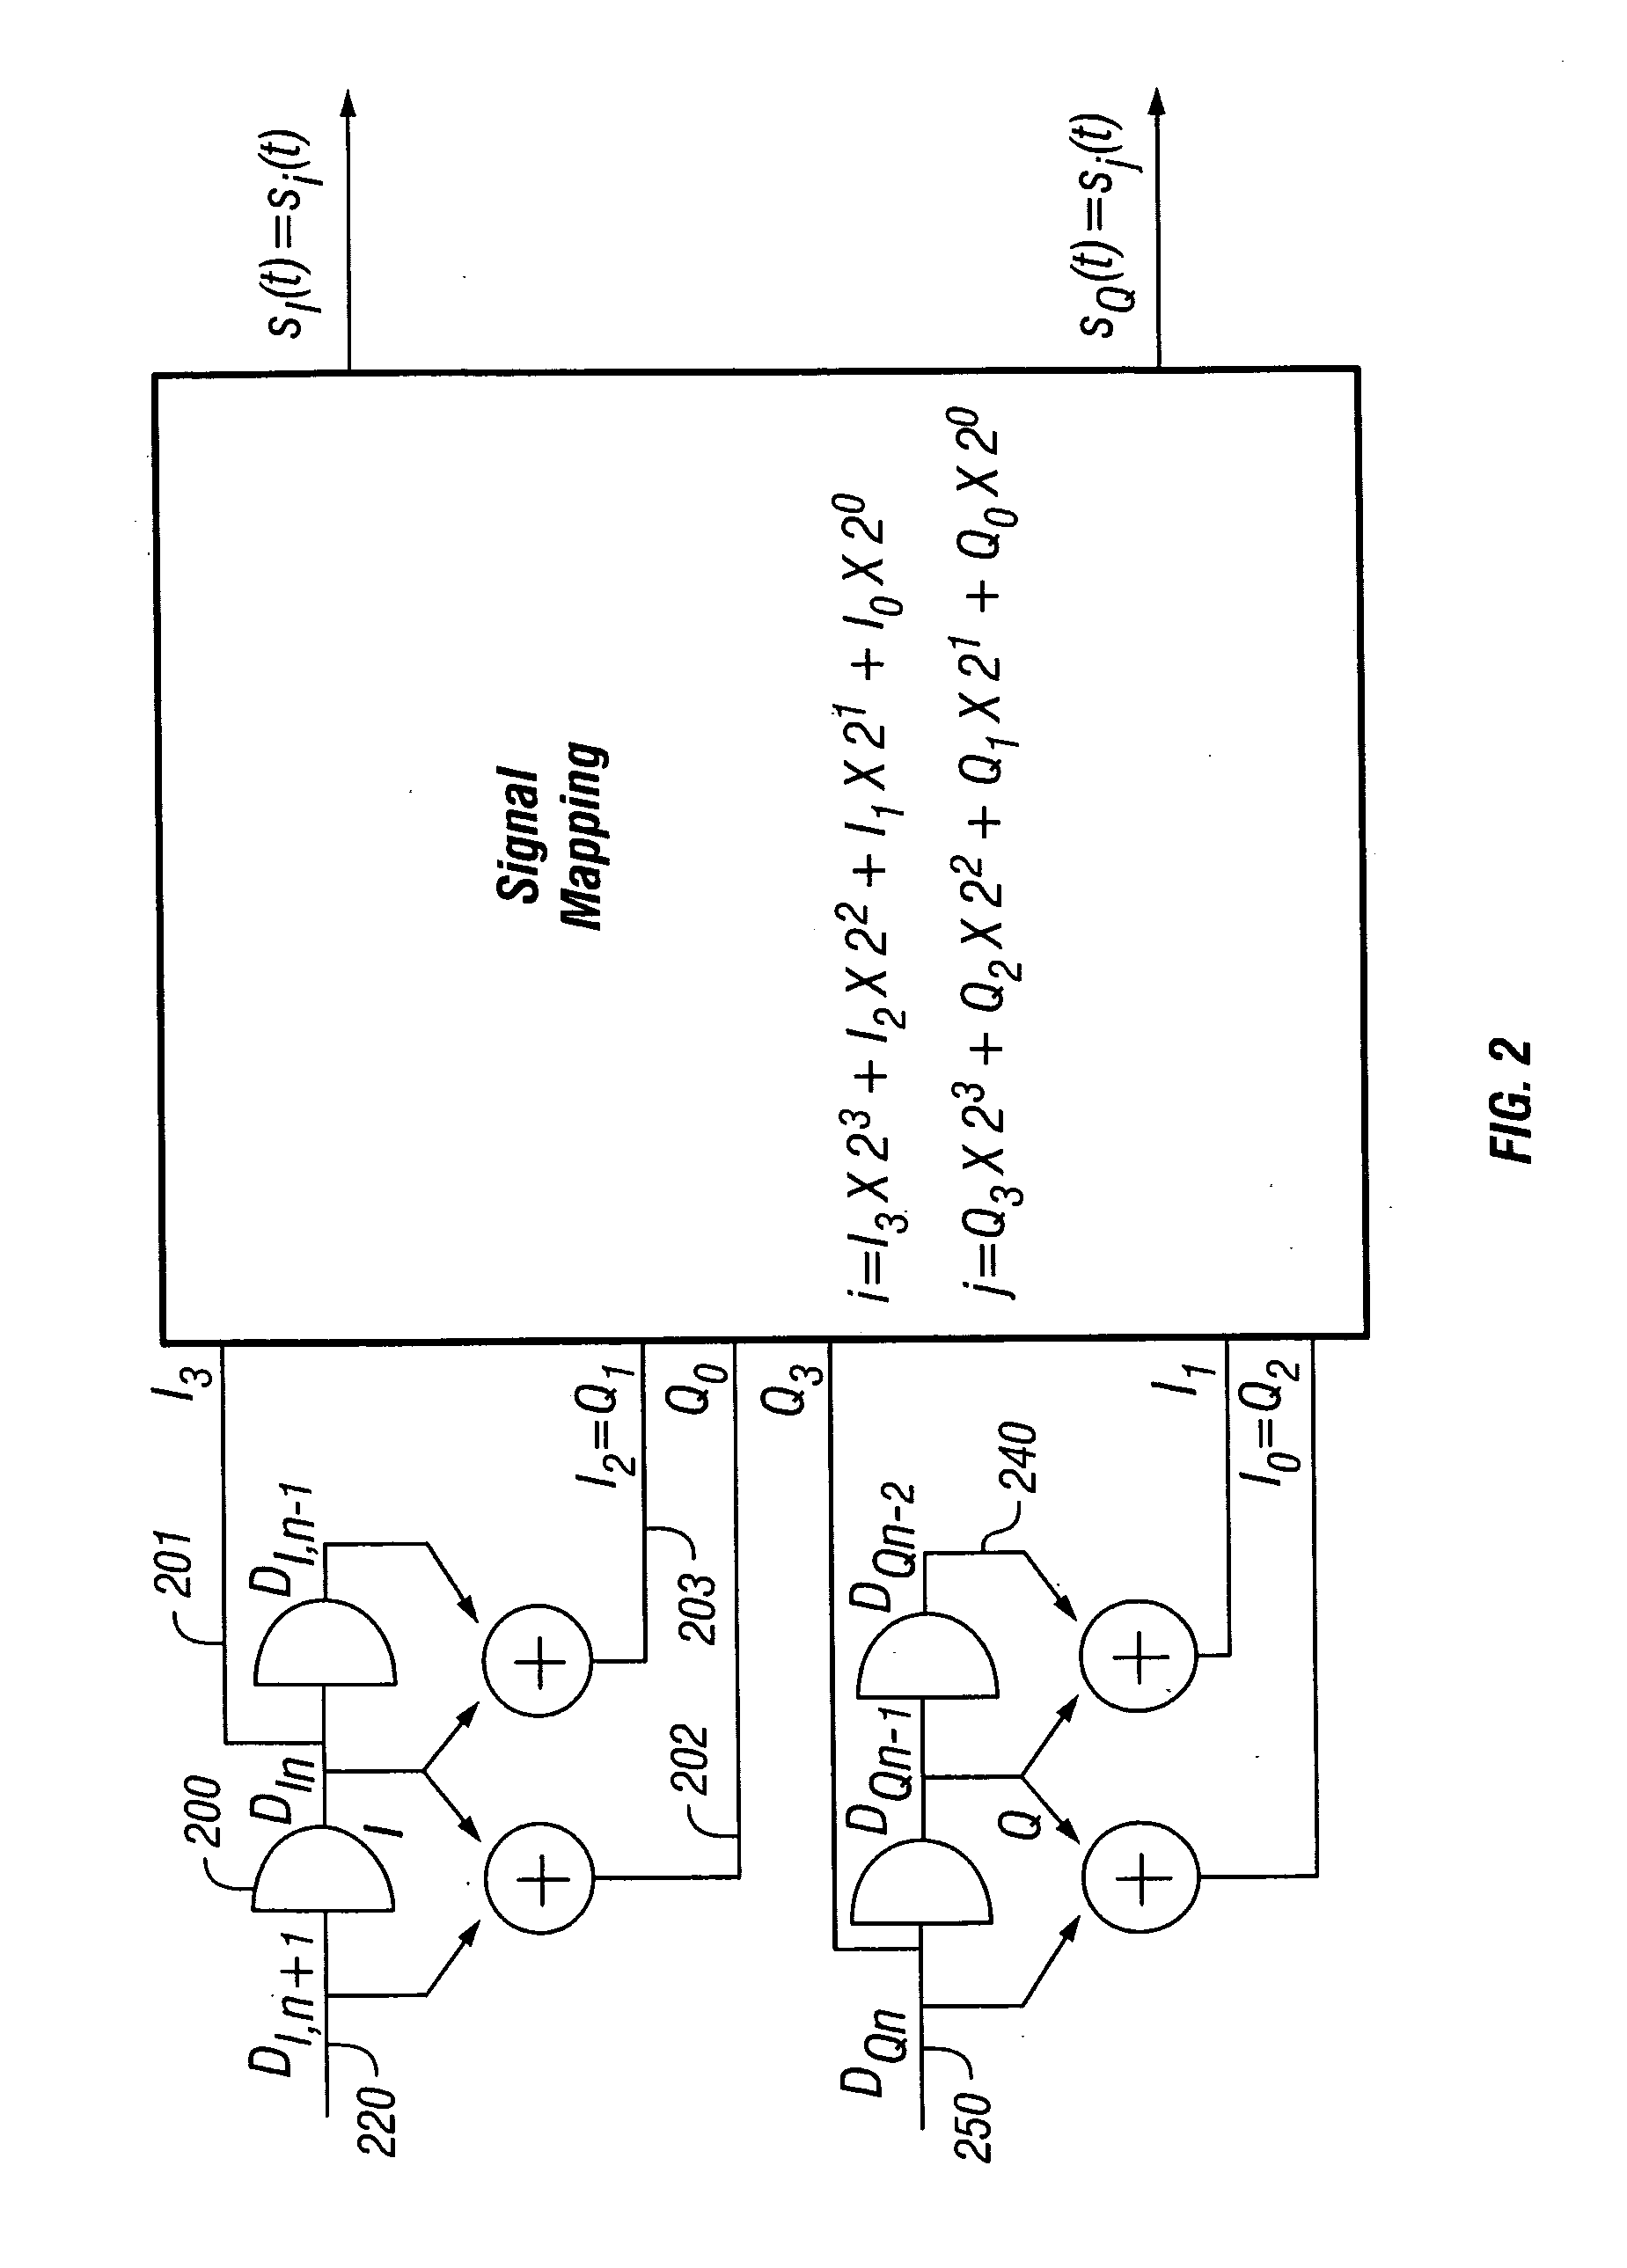 Reduced complexity coding system using iterative decoding